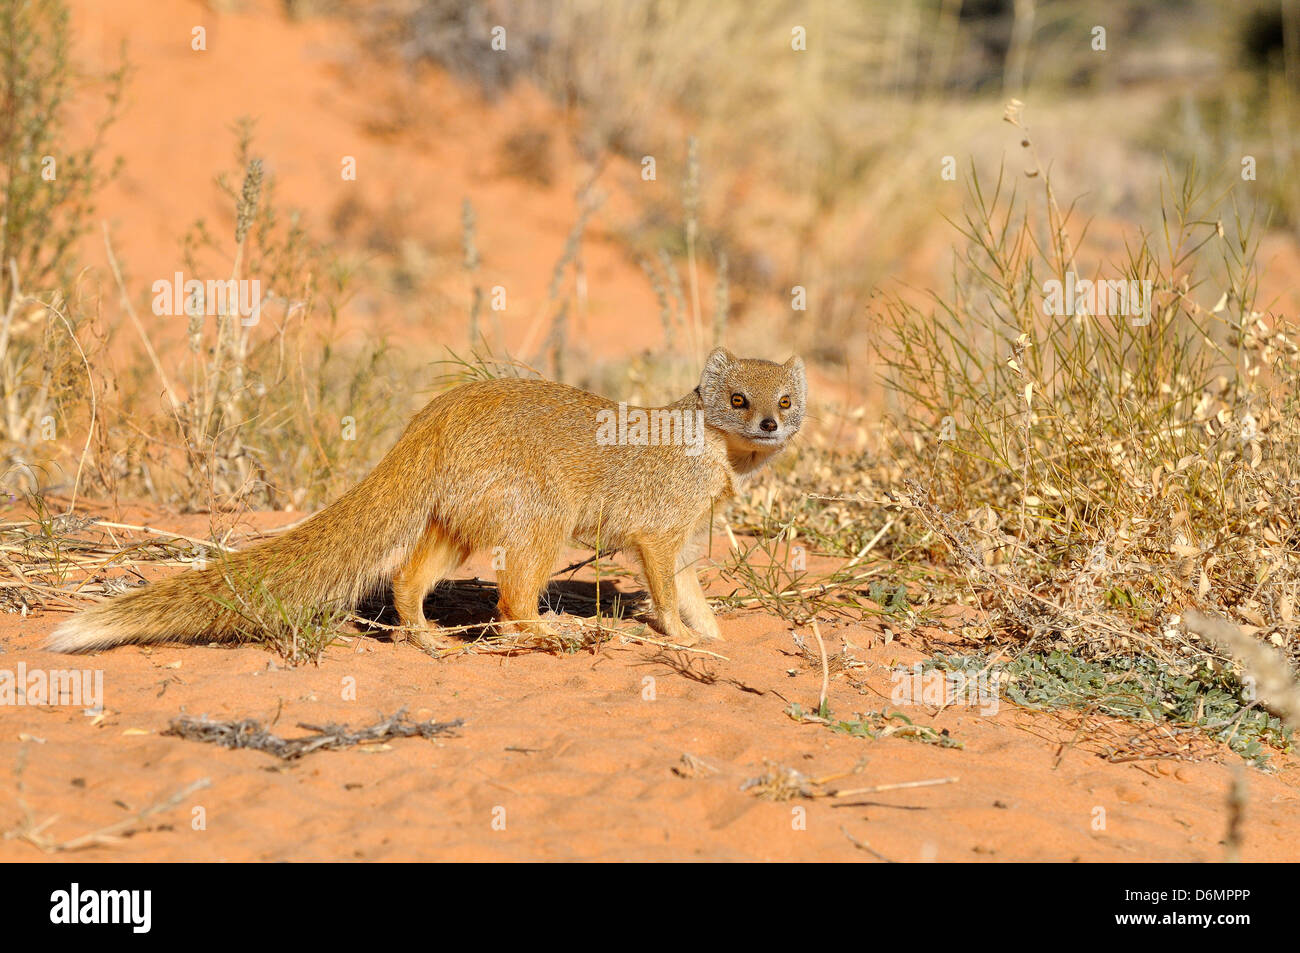 Yellow Mongoose Cynictis penicillata Photographed in Kgalagadi National Park, South Africa Stock Photo